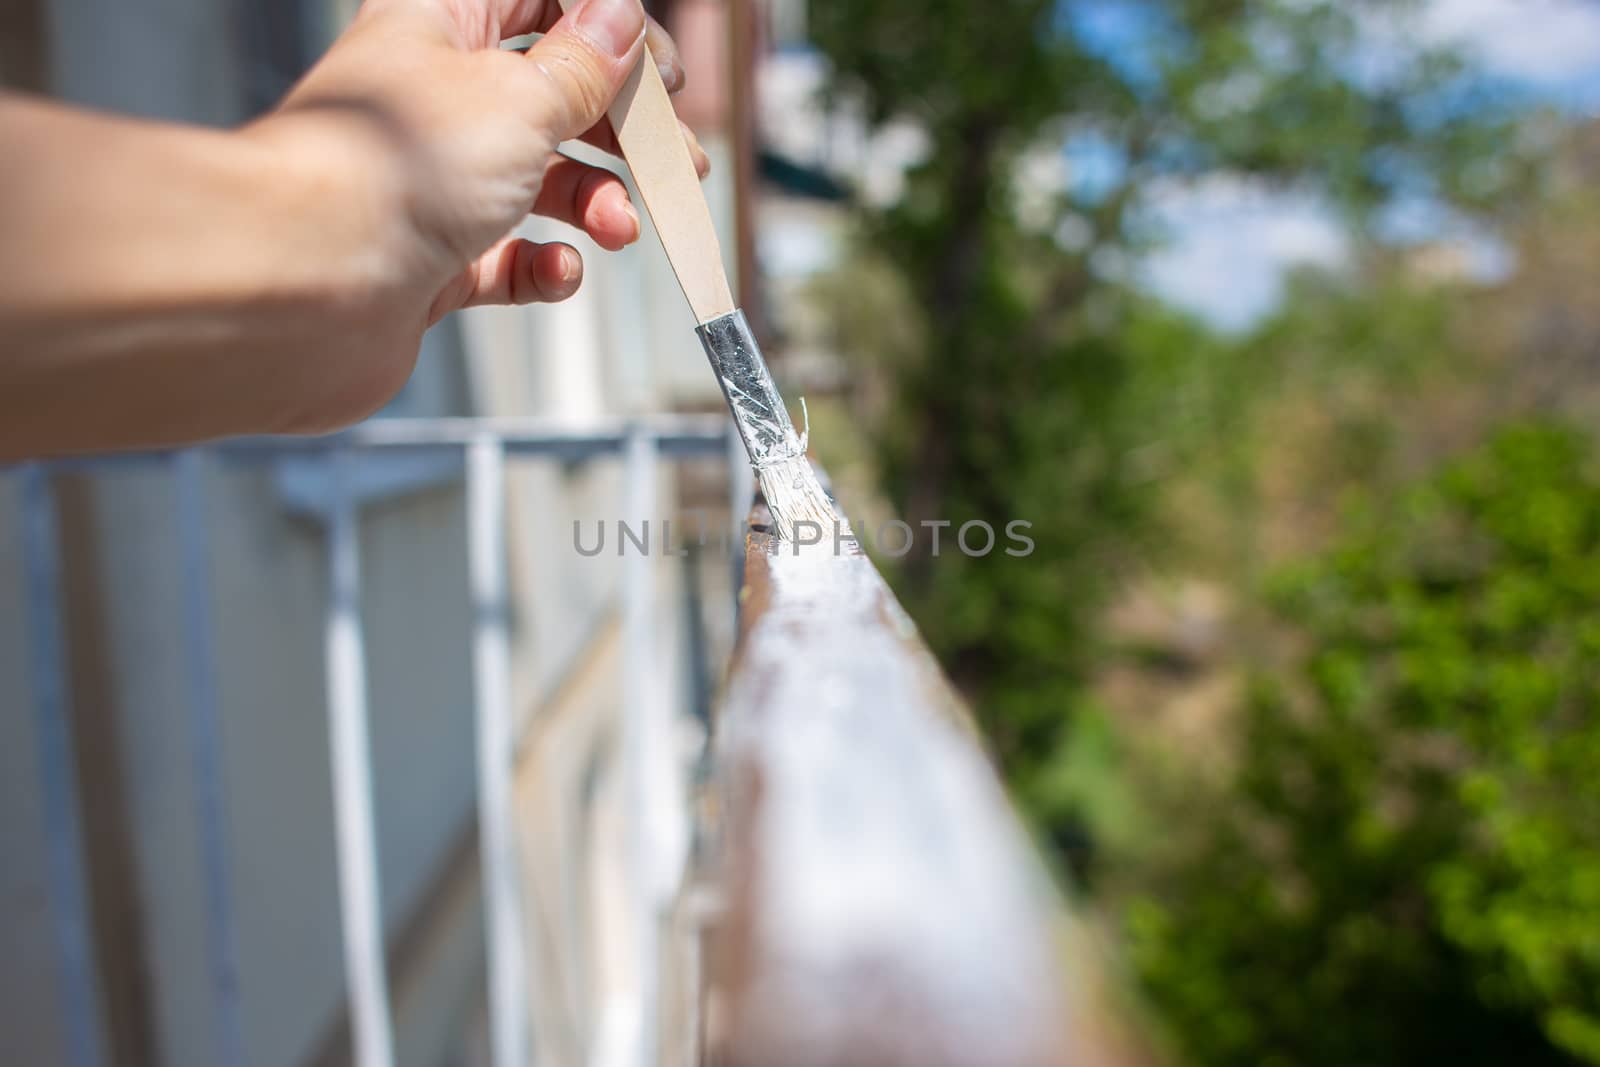 The process of painting rusty peeling rods on the fence. Man paints a brush with a fence, hand closeup. Spring work or repair